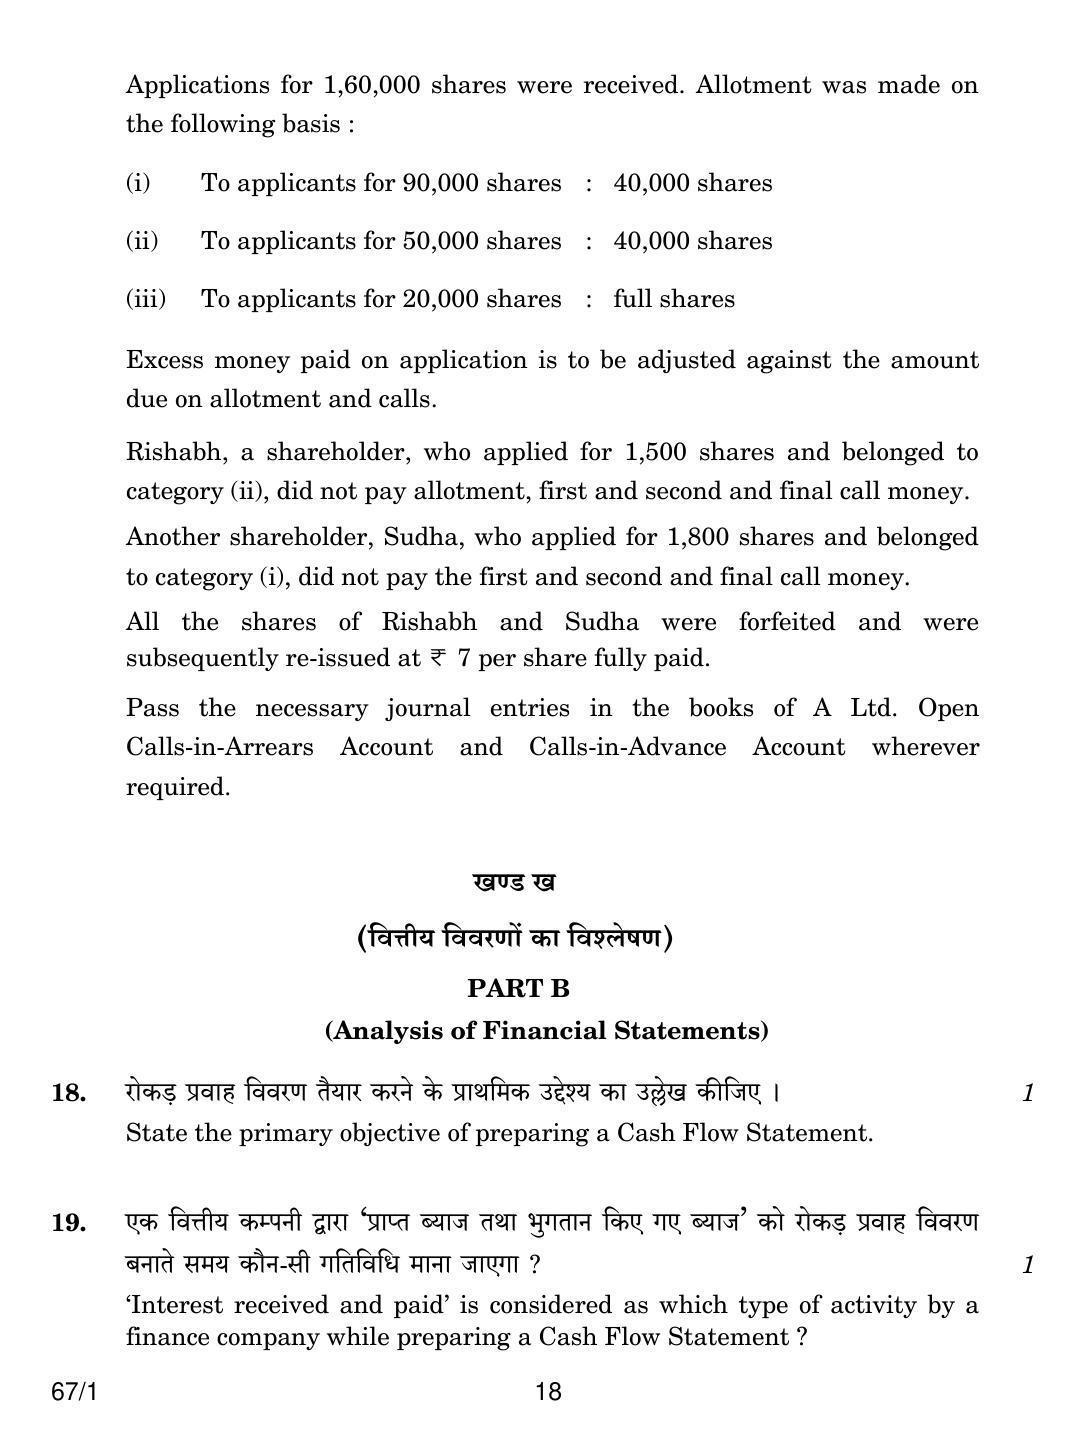 CBSE Class 12 67-1 ACCOUNTANCY 2018 Question Paper - Page 18